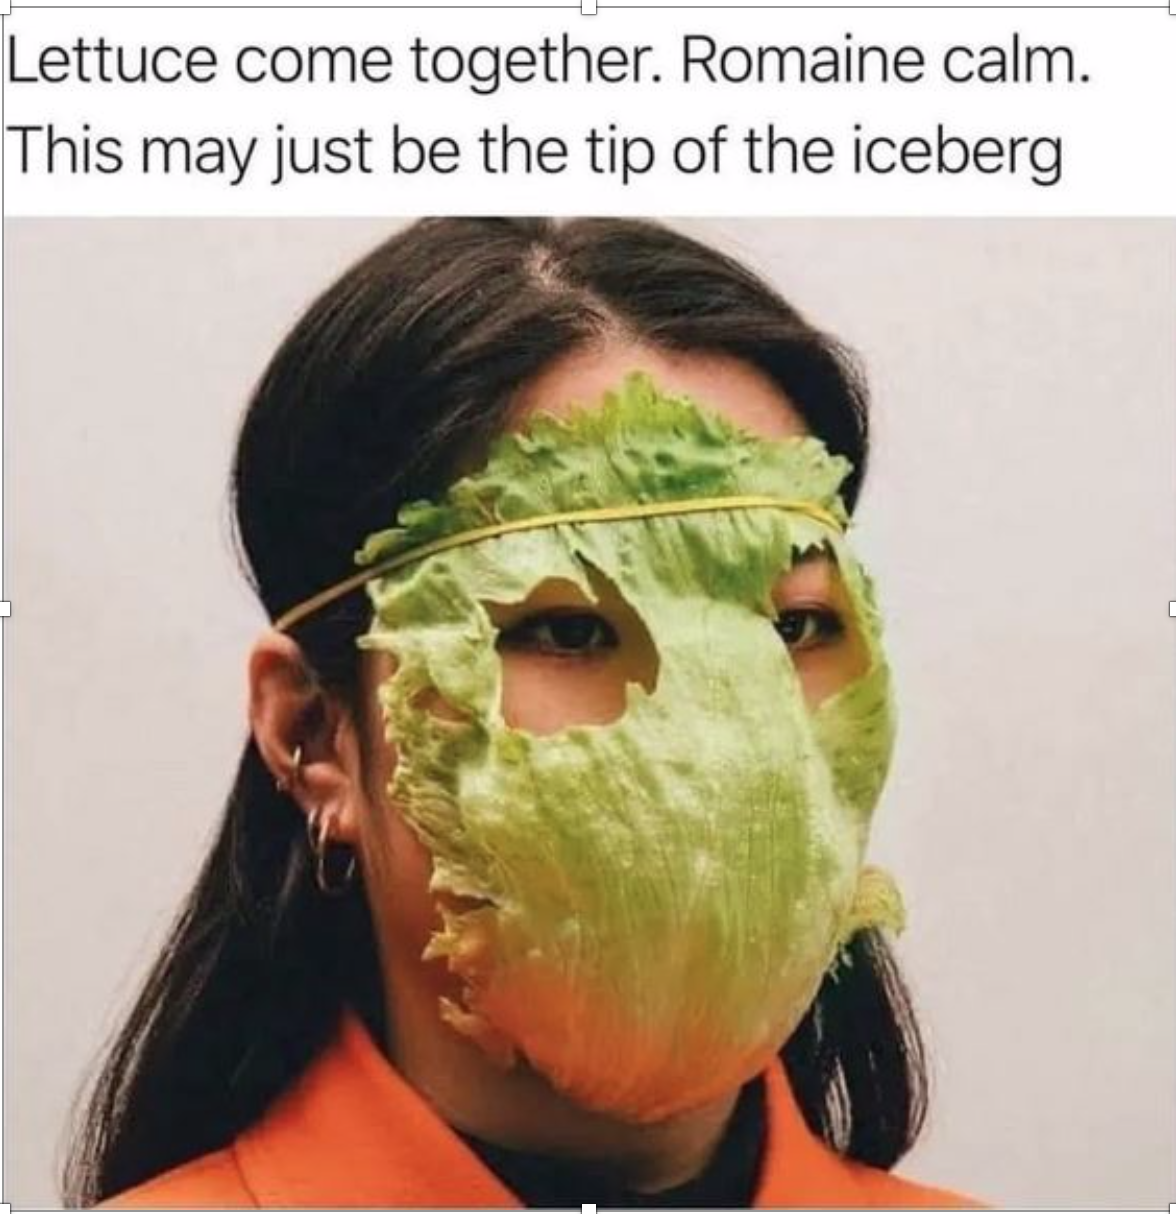 Photo of woman with lettuce leaf over her face. Caption reads "Lettuce come together. Romaine calm. This may just be the tip of the iceberg."